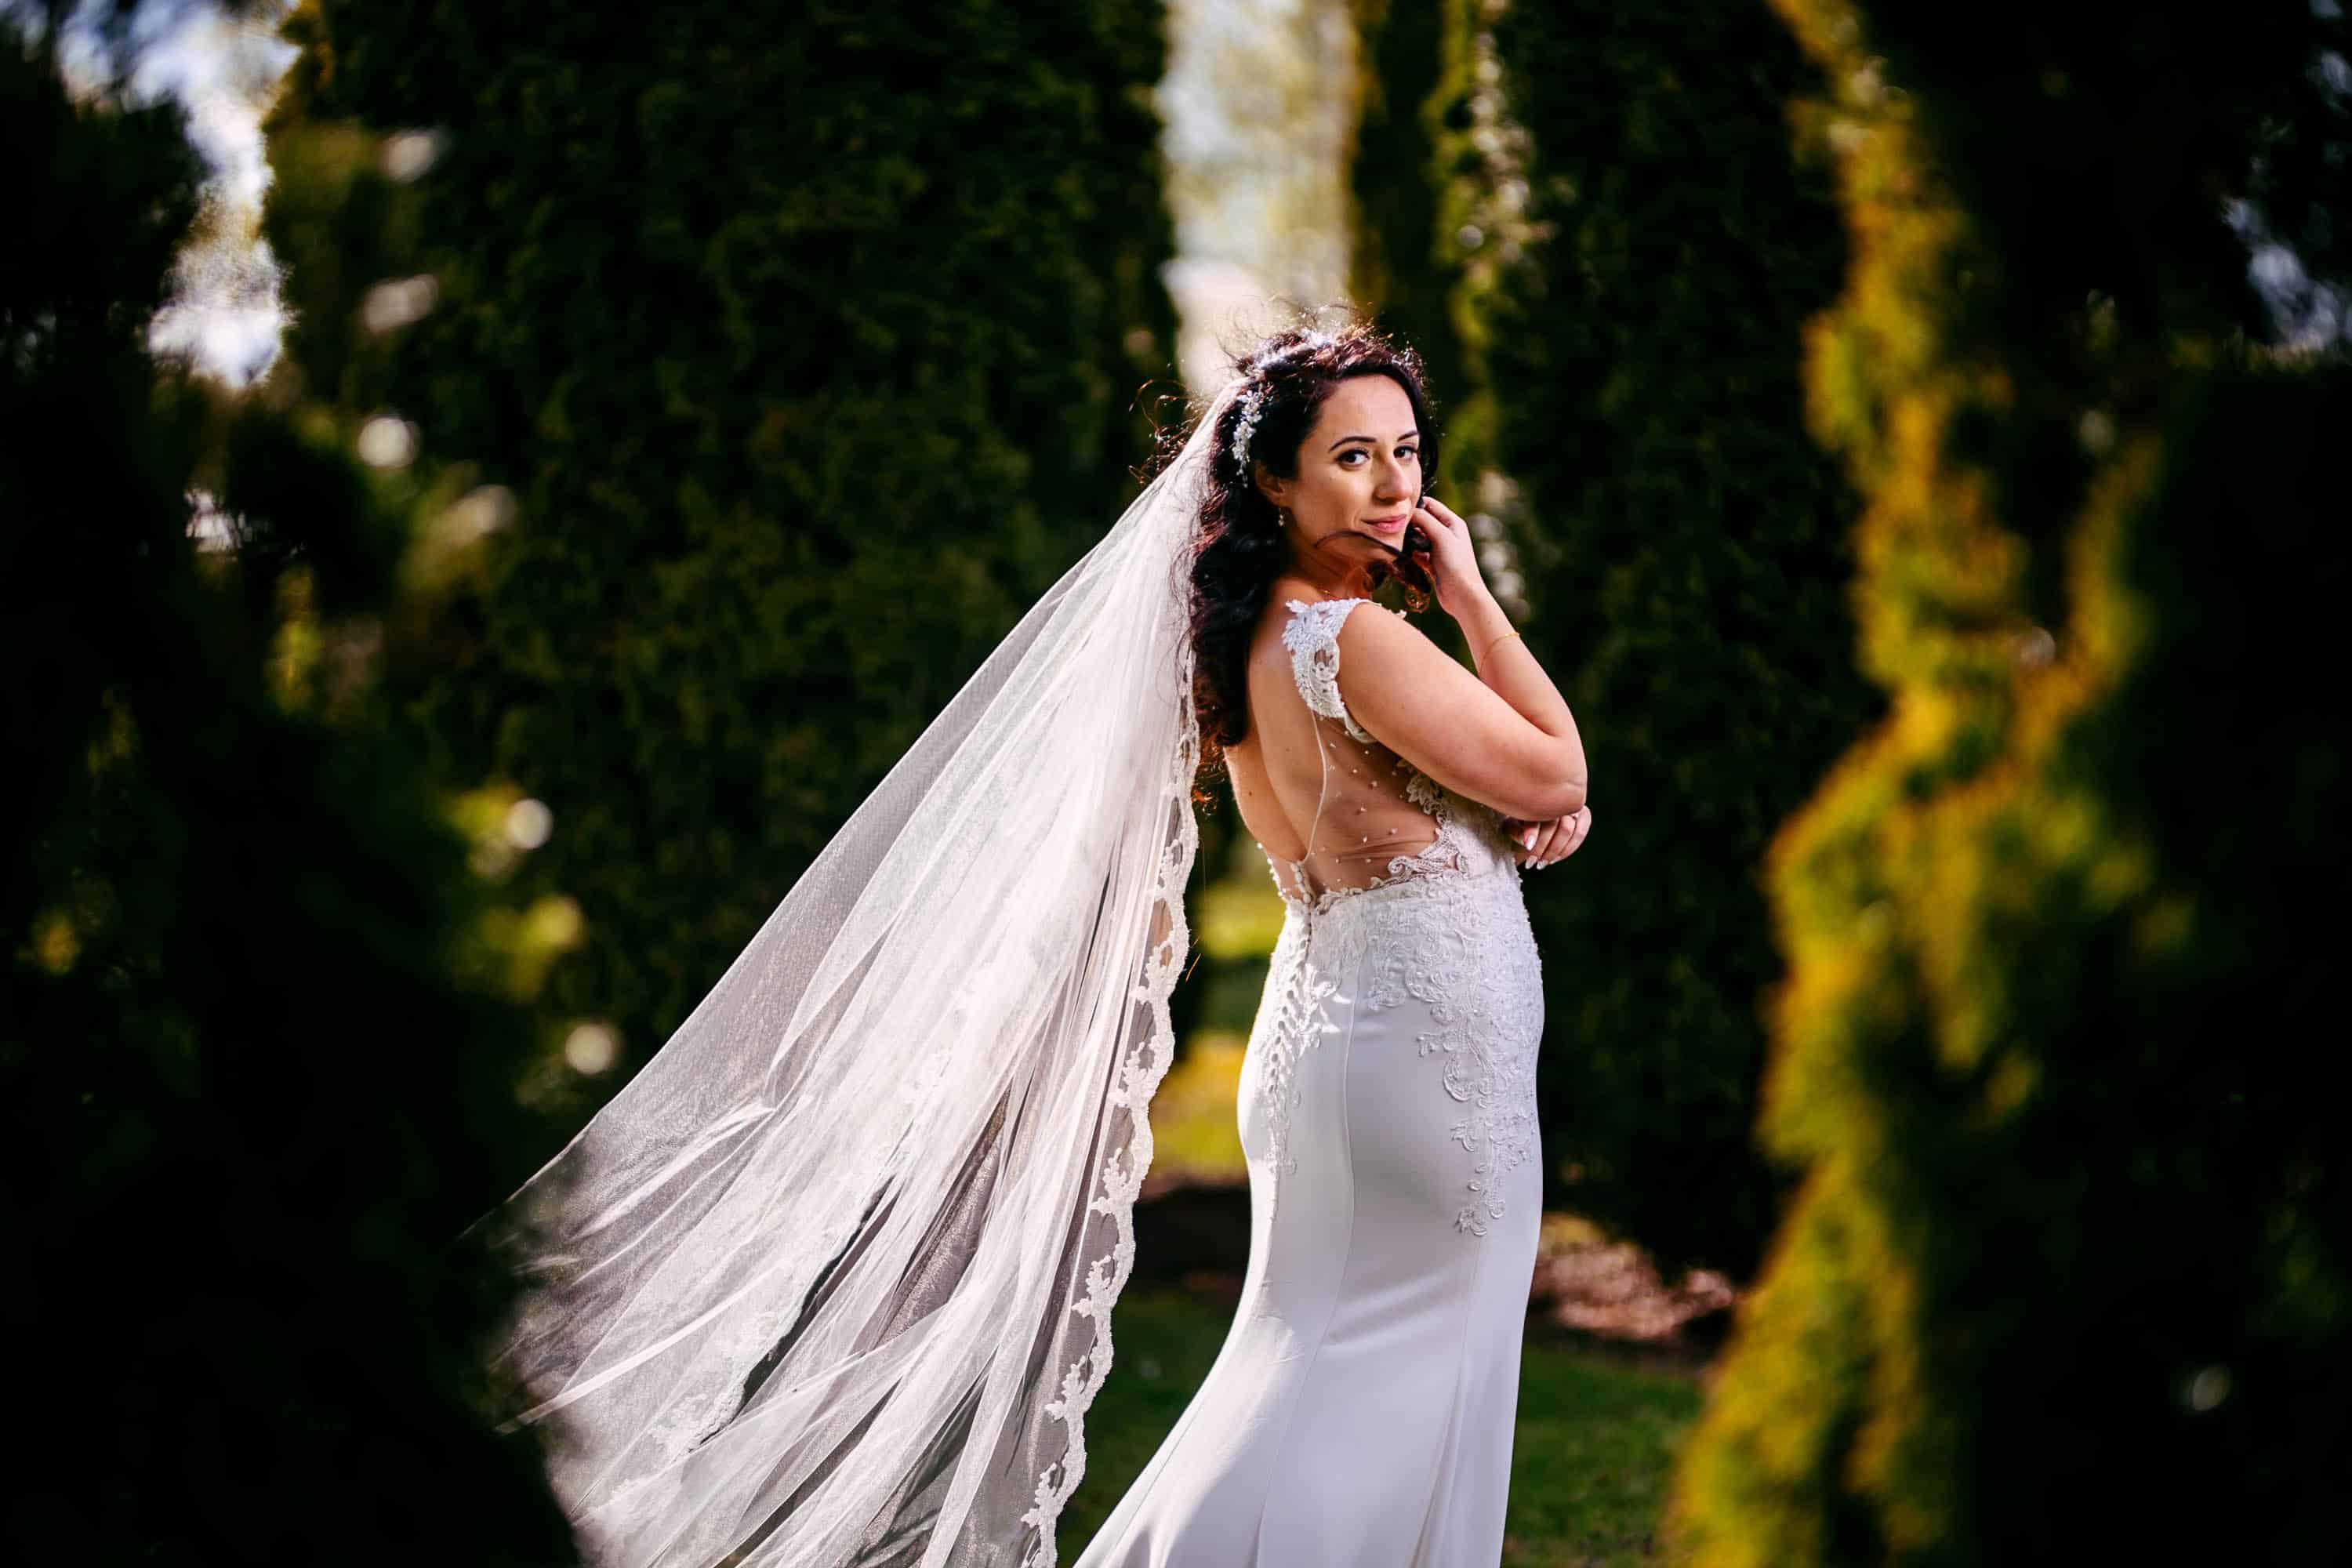 A bride poses in front of a tree in a garden.